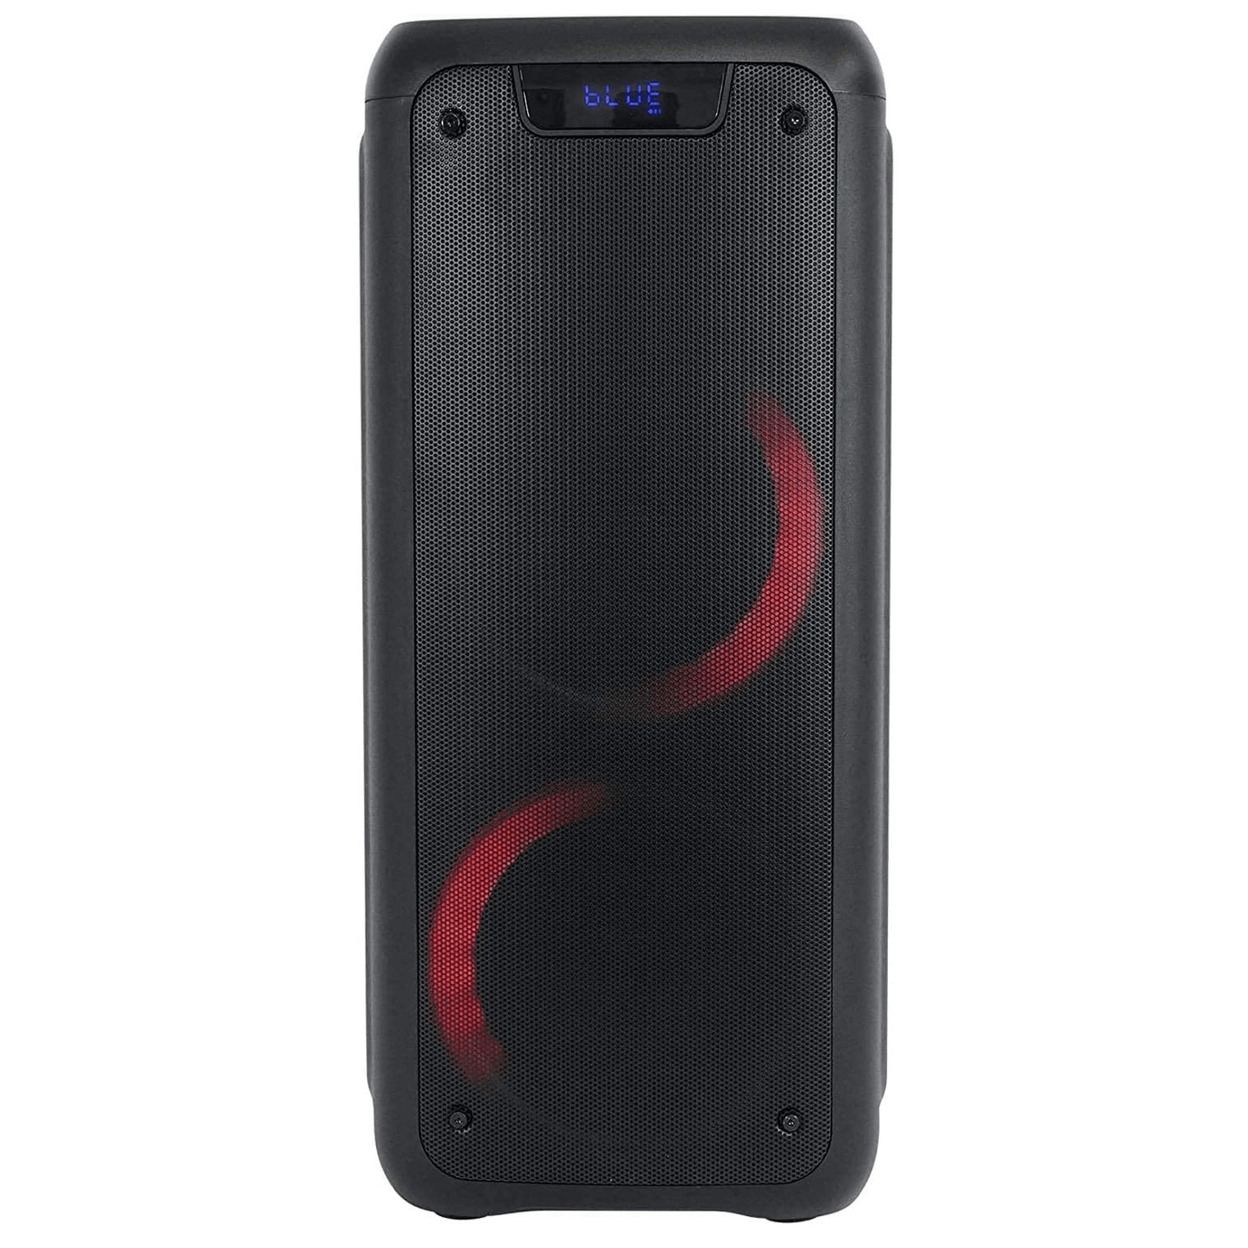 Norcent Dual 6.5 Portable Party Bluetooth Speaker With Flashing LED Lights